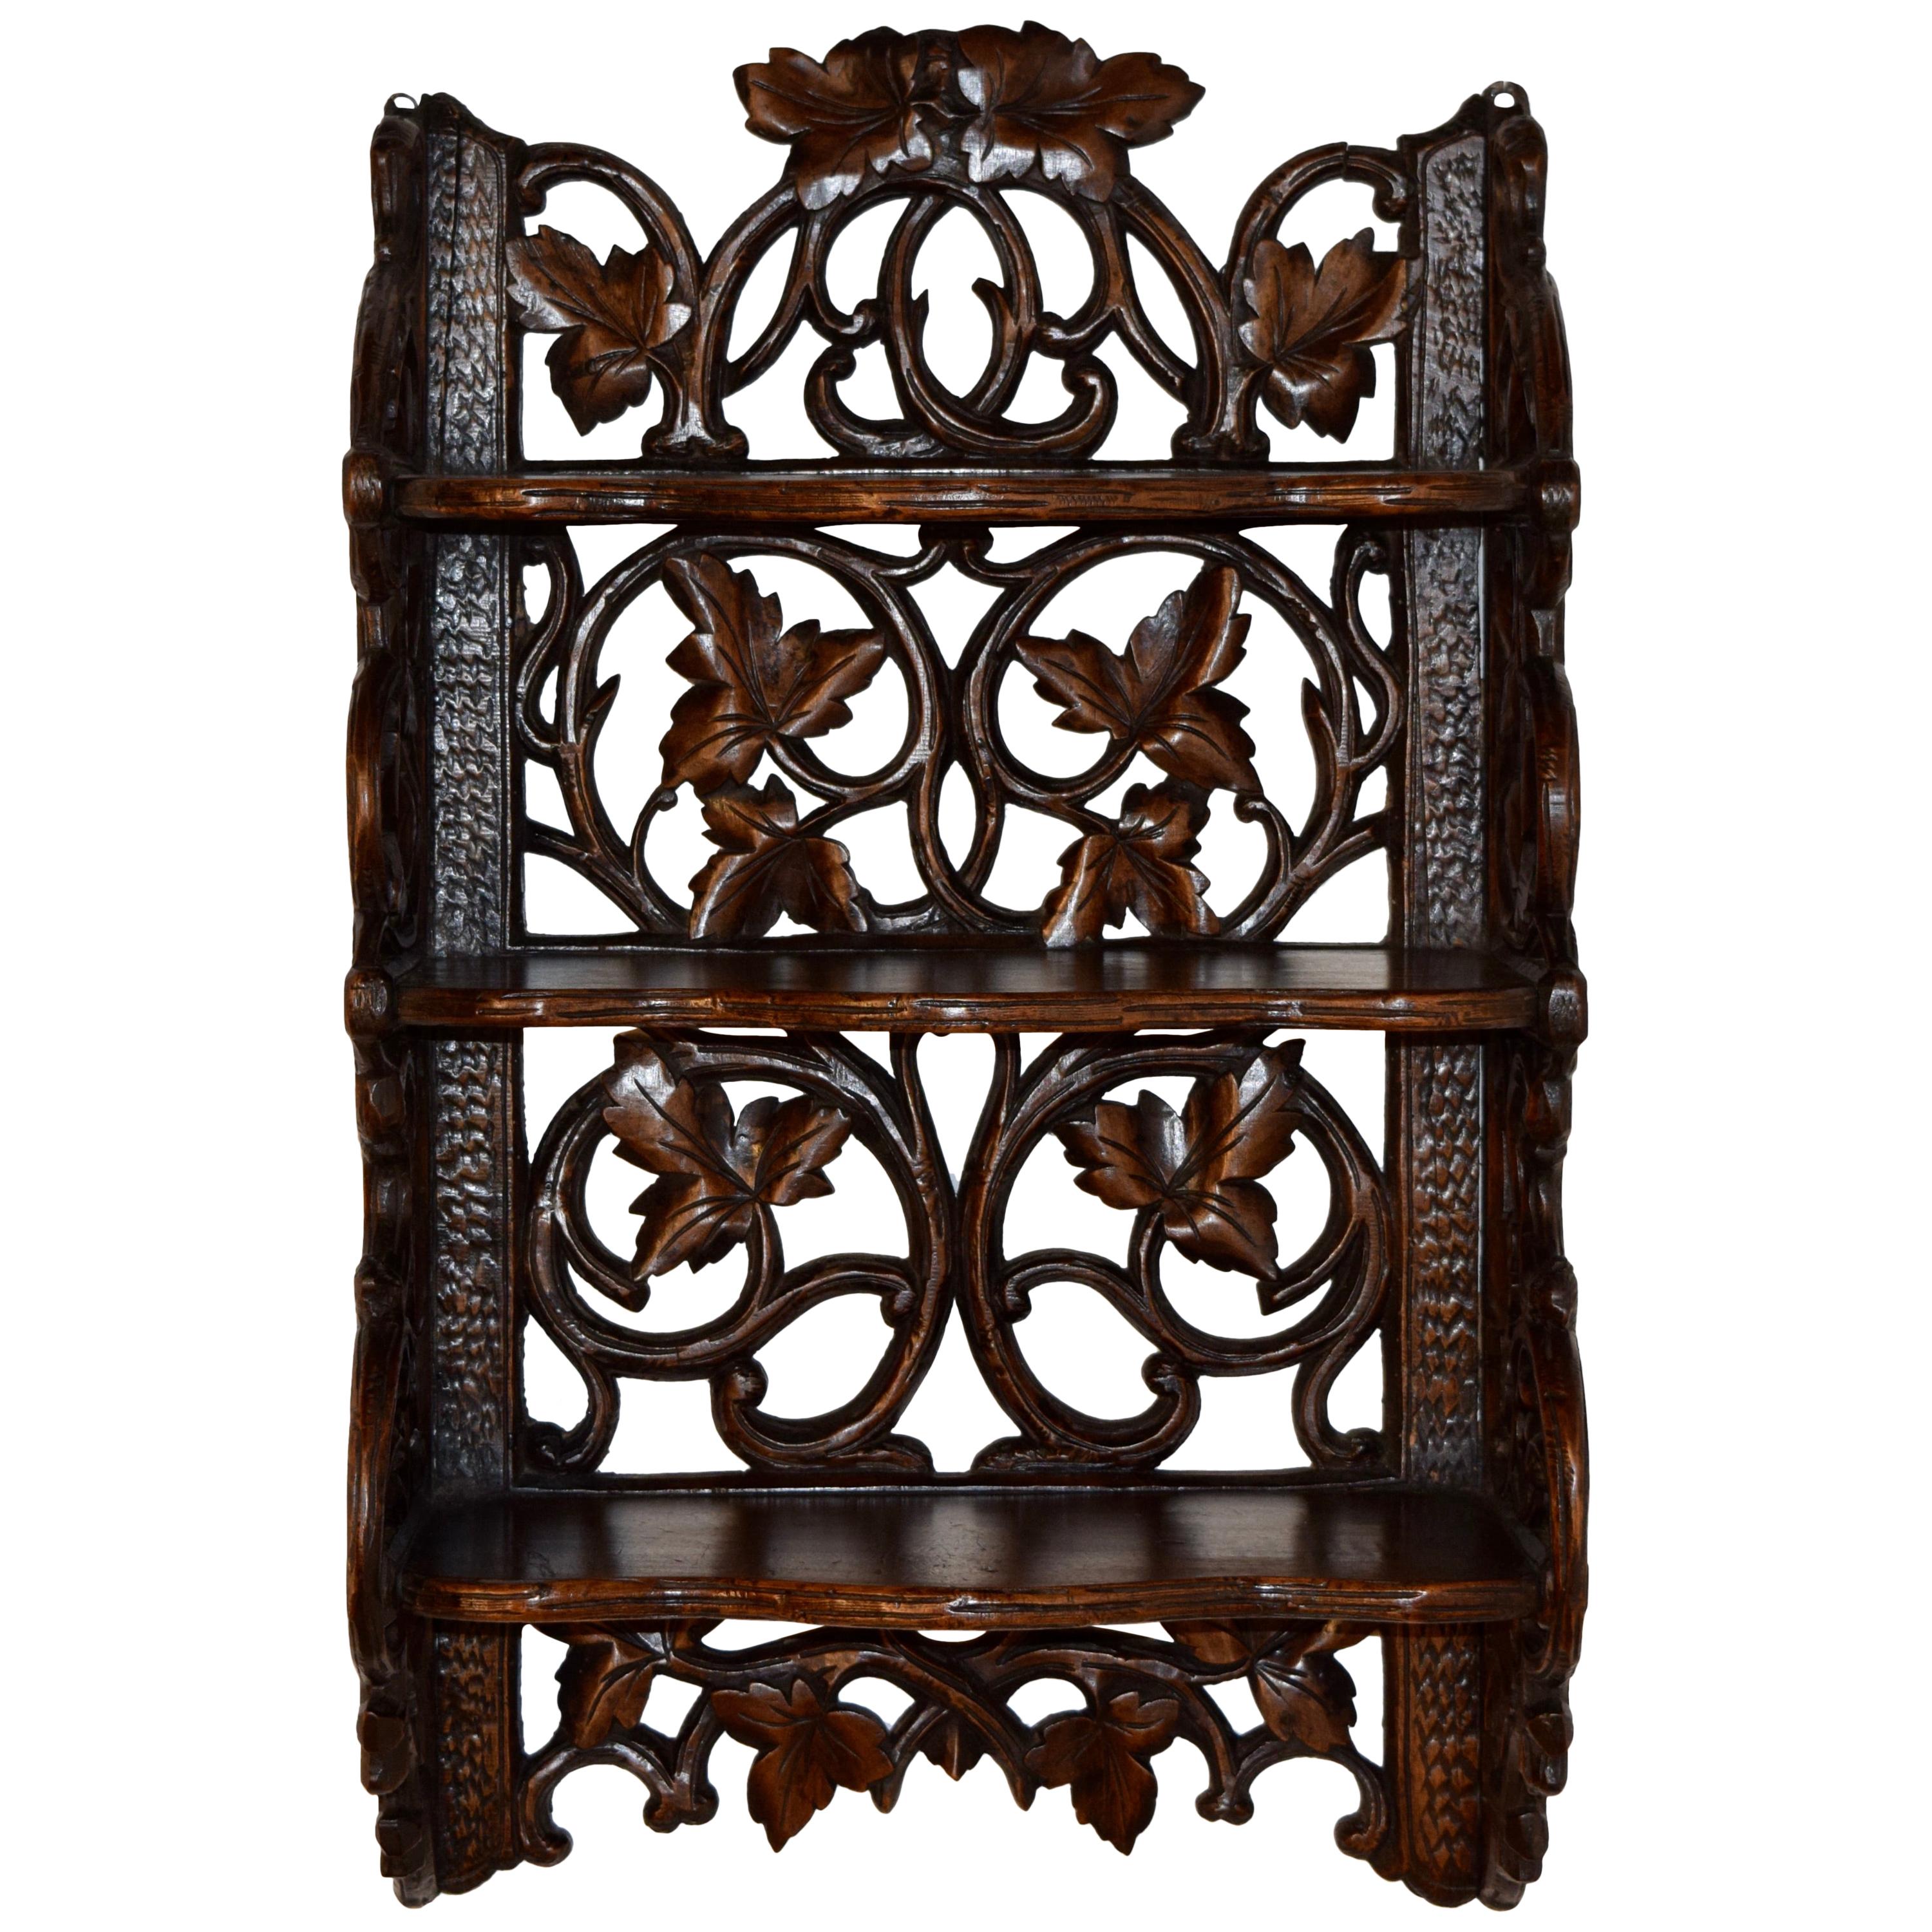 19th Century Black Forest Carved Wall Shelf